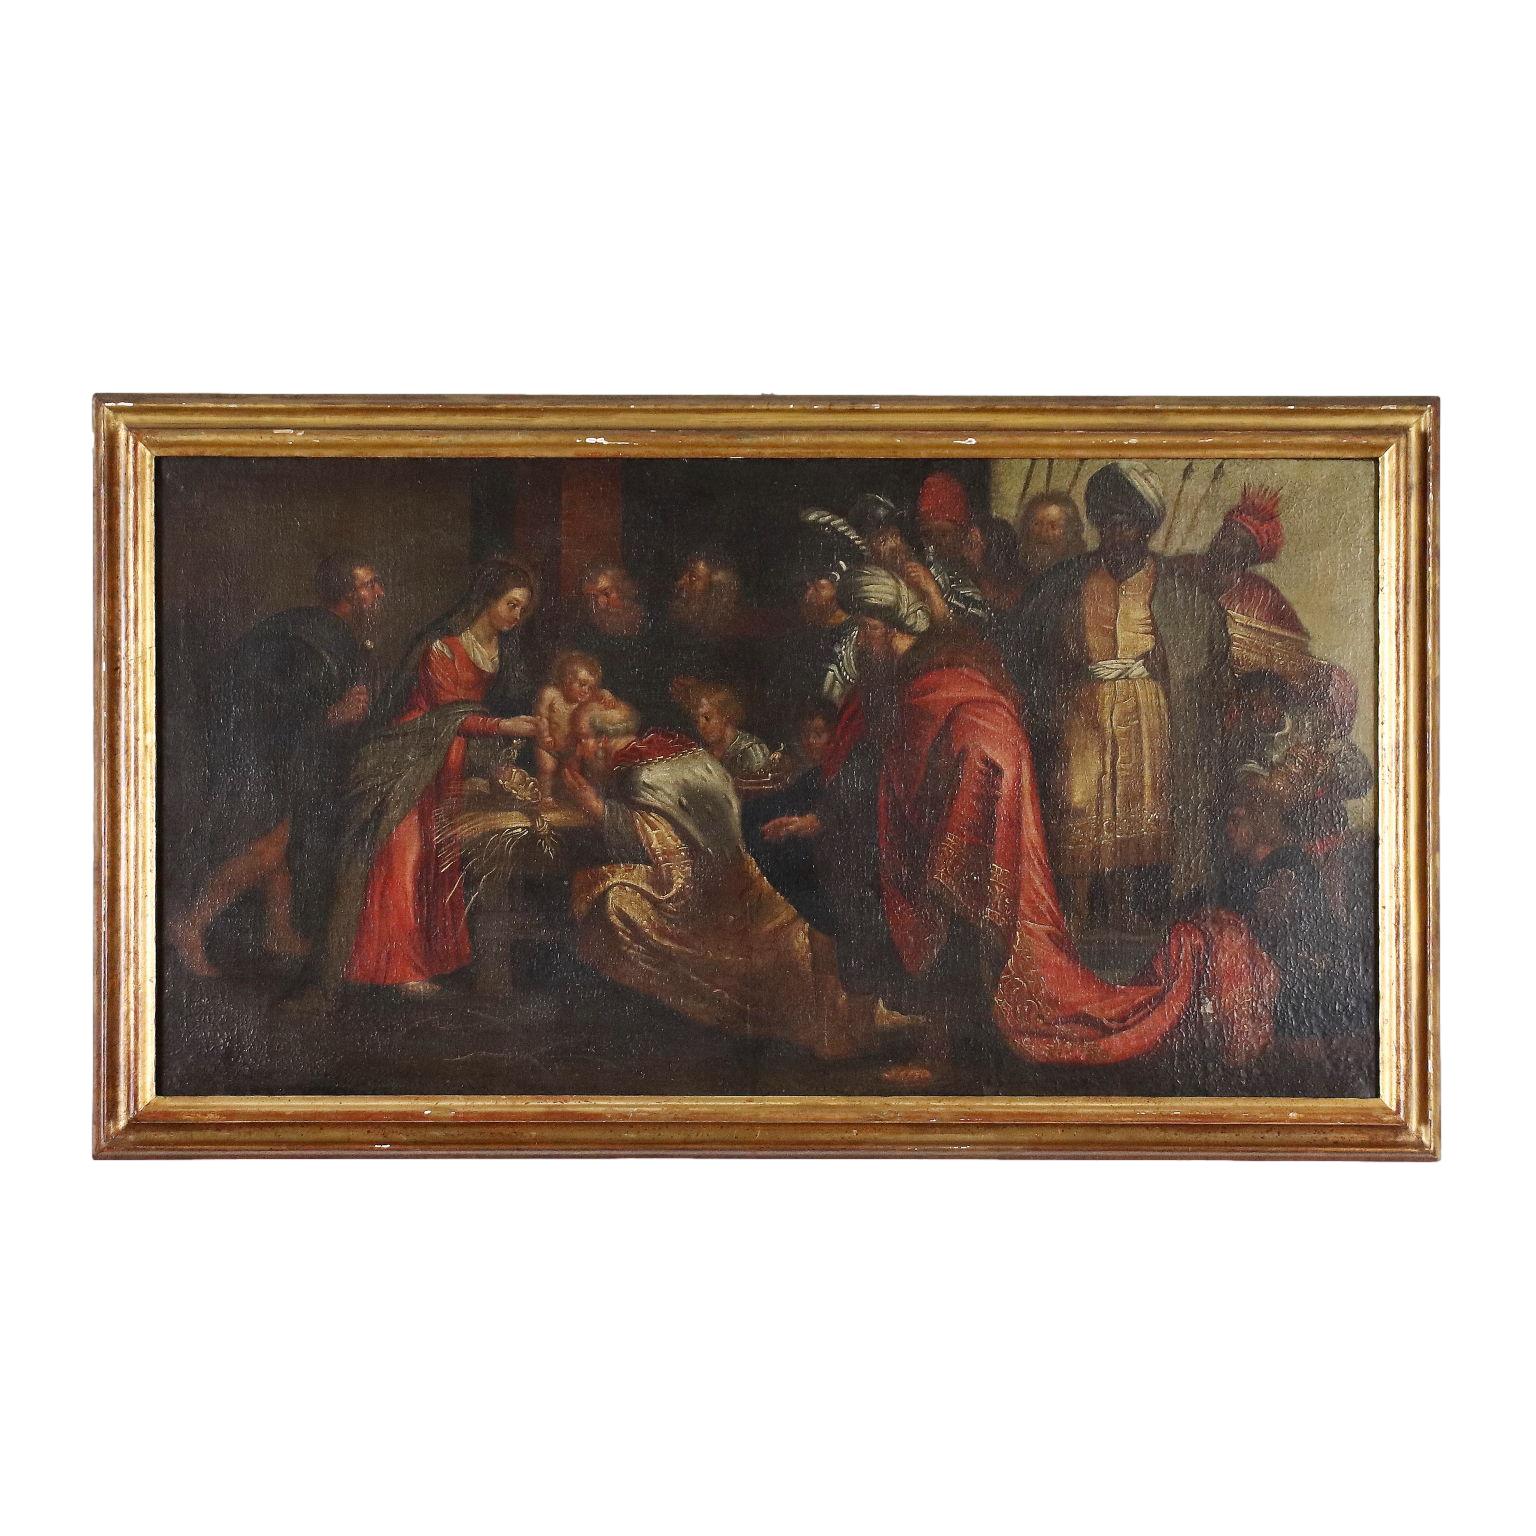 Unknown Figurative Painting - Adoration of the Magi, XVIIth century